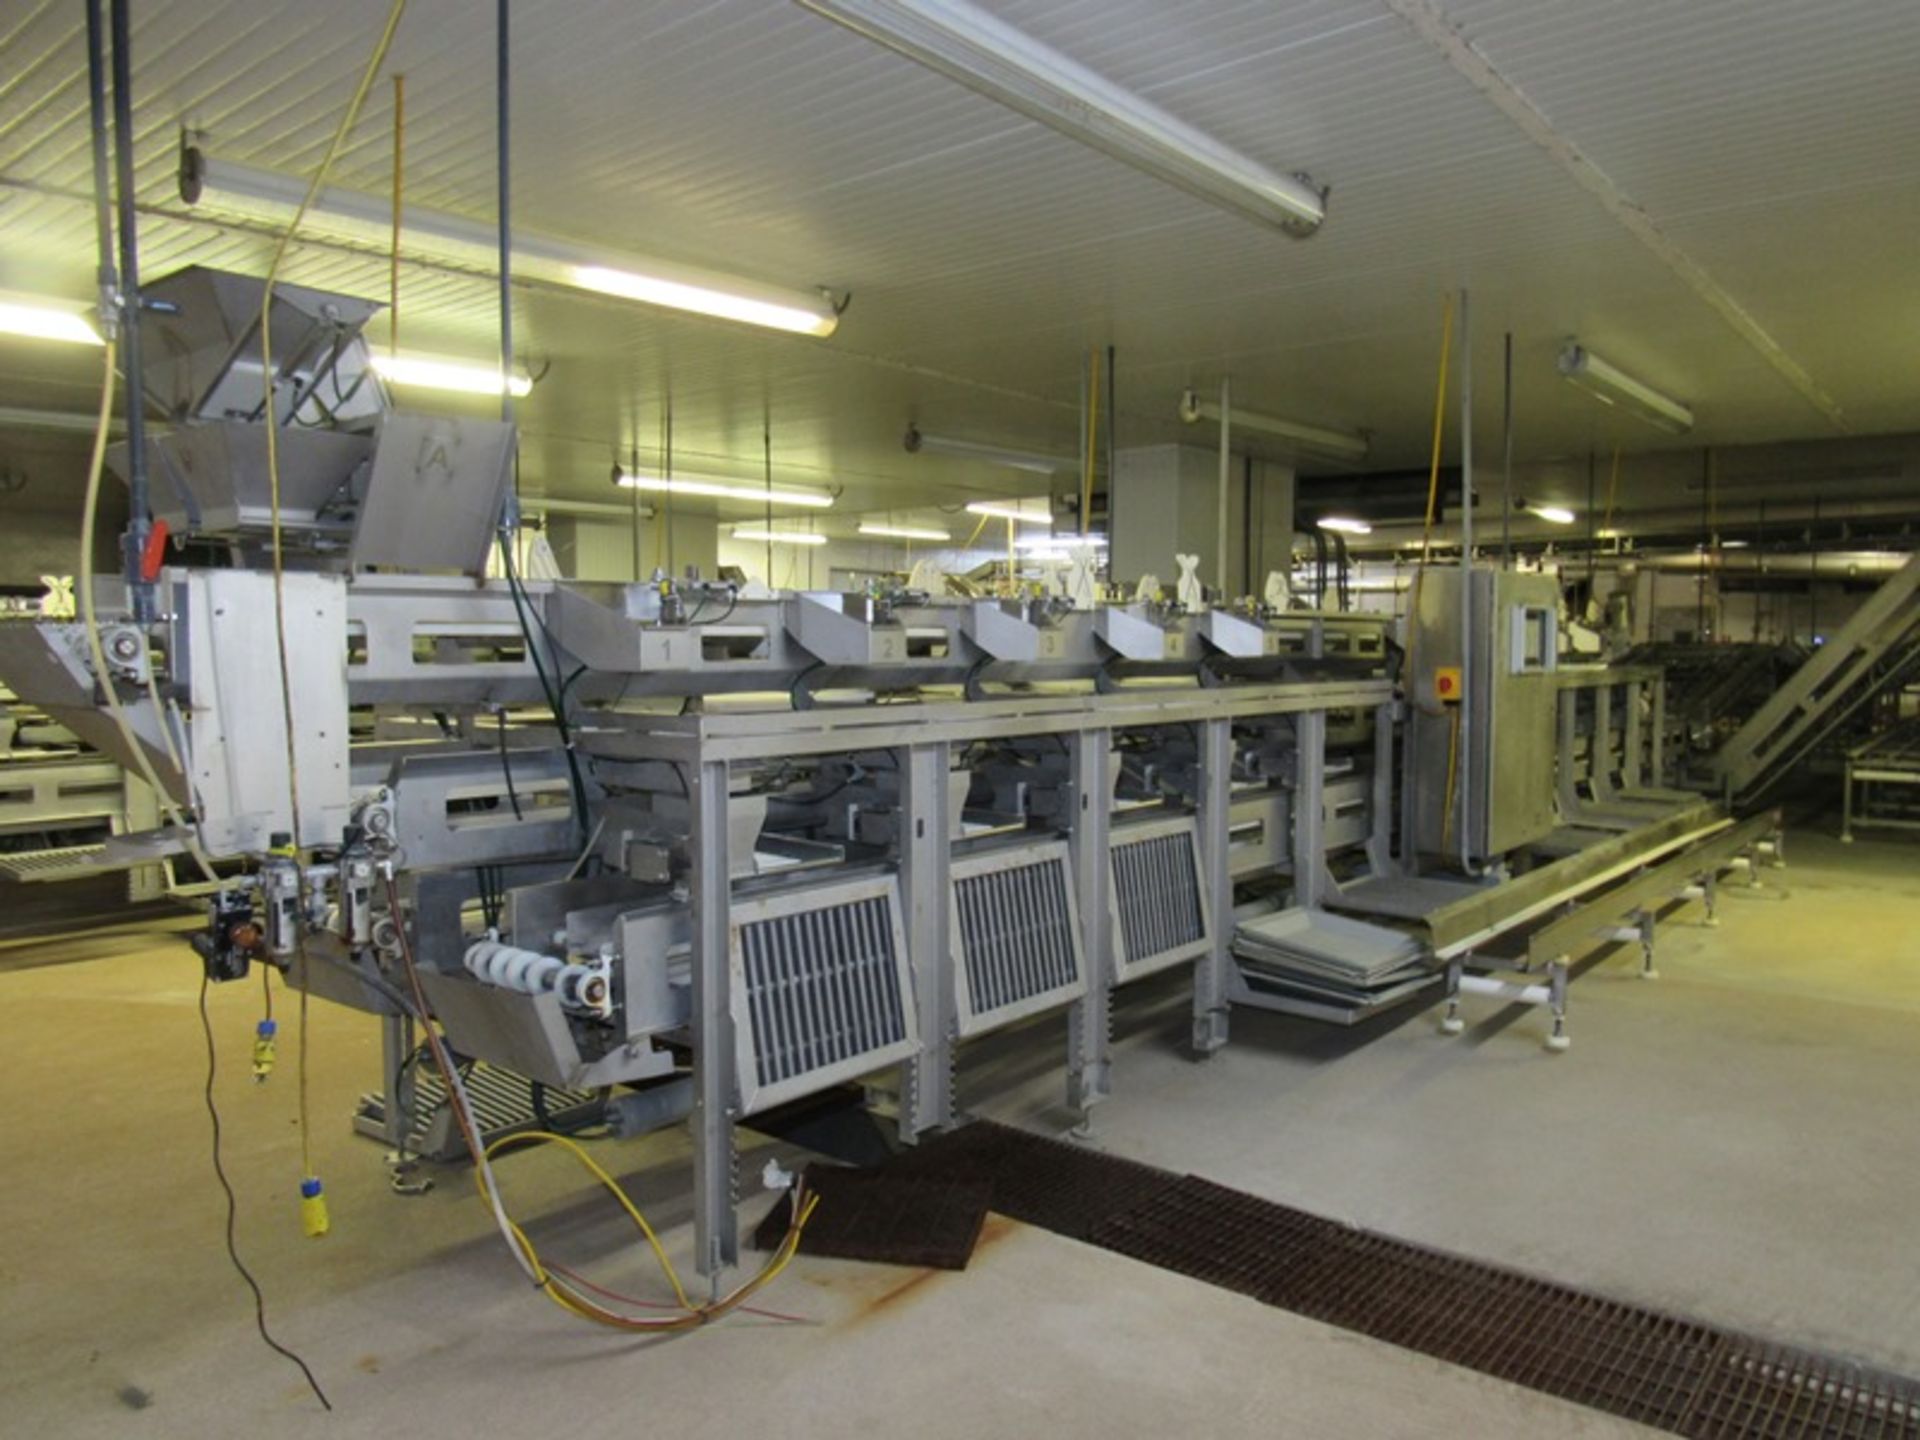 C.A.T. Stainless Steel Grading Line, dual lanes, 10 positions per lane, pneumatic drop chutes, - Image 2 of 18